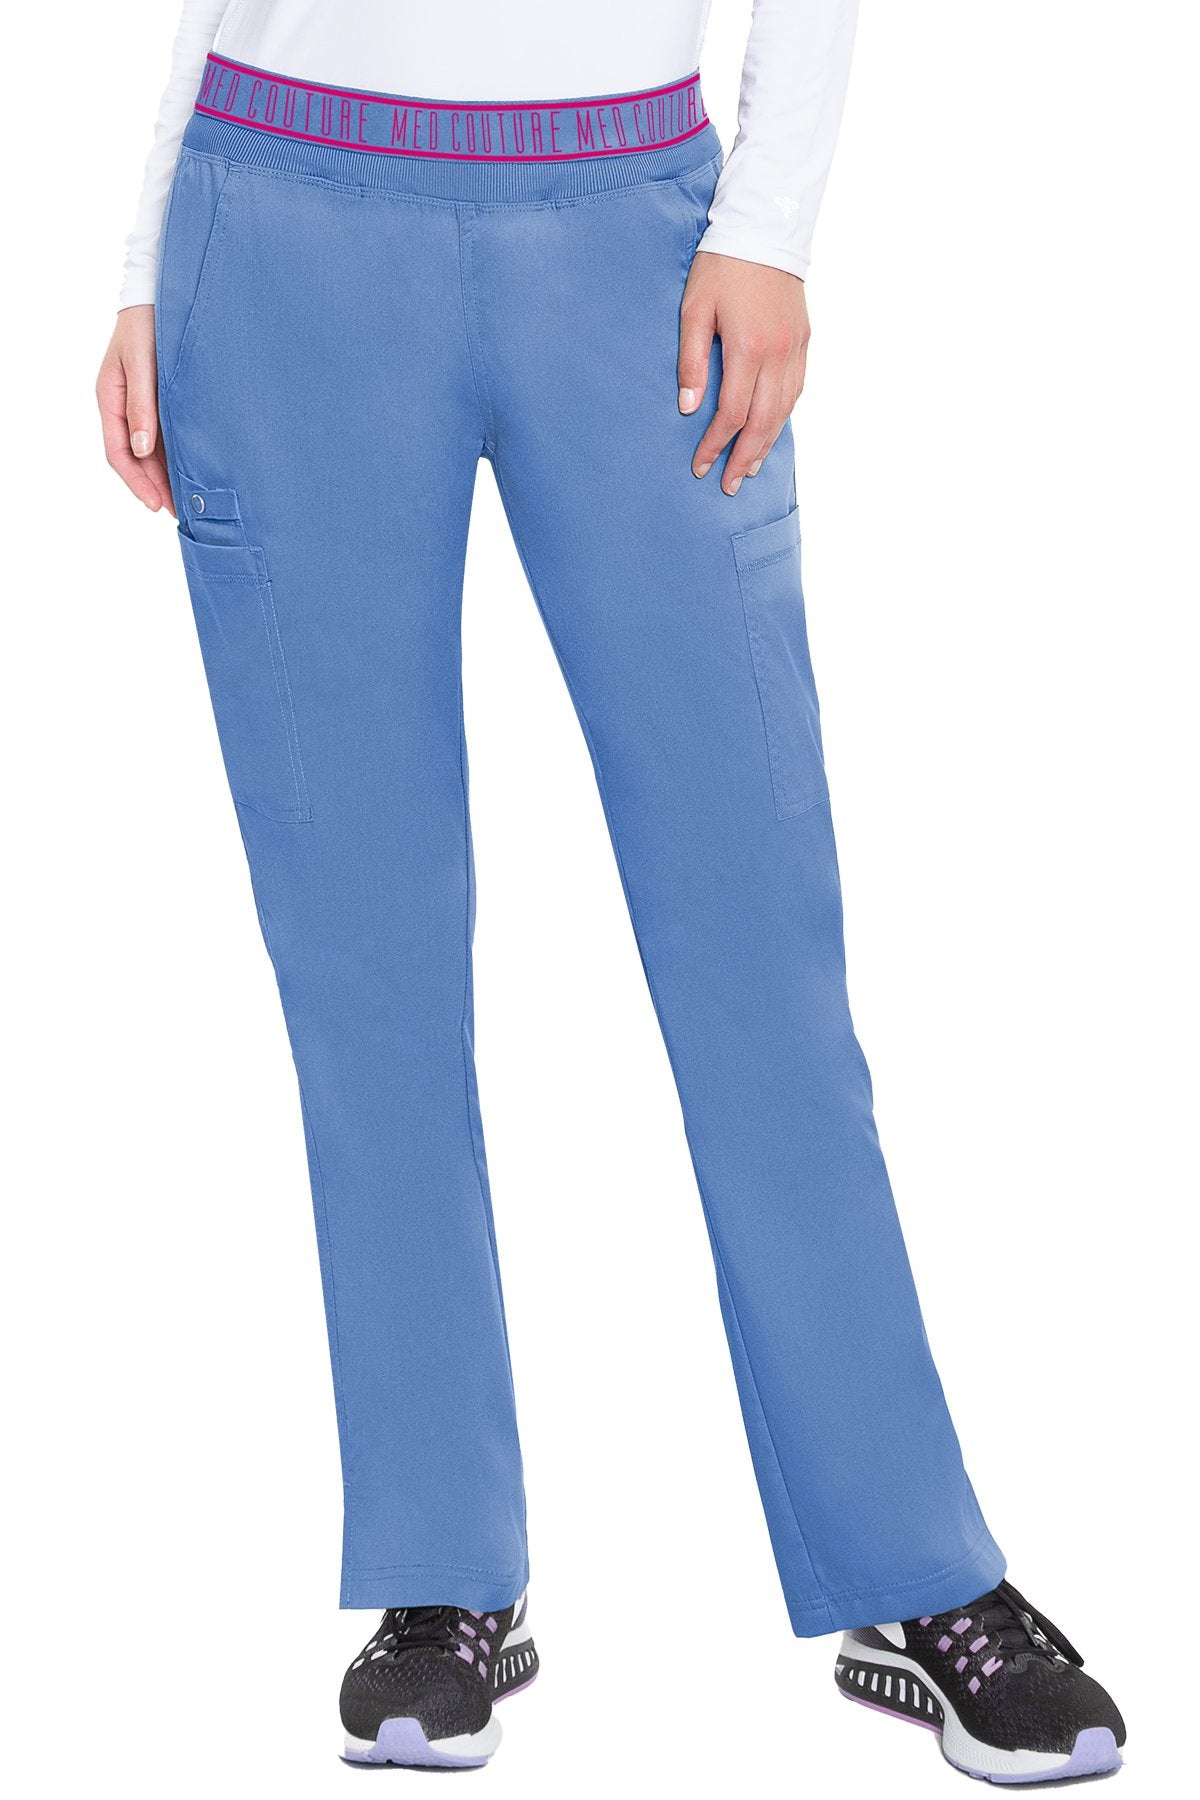 Yoga 2 Cargo Pocket Pant by Med Couture (Petite) XS-5XL/ Ceil